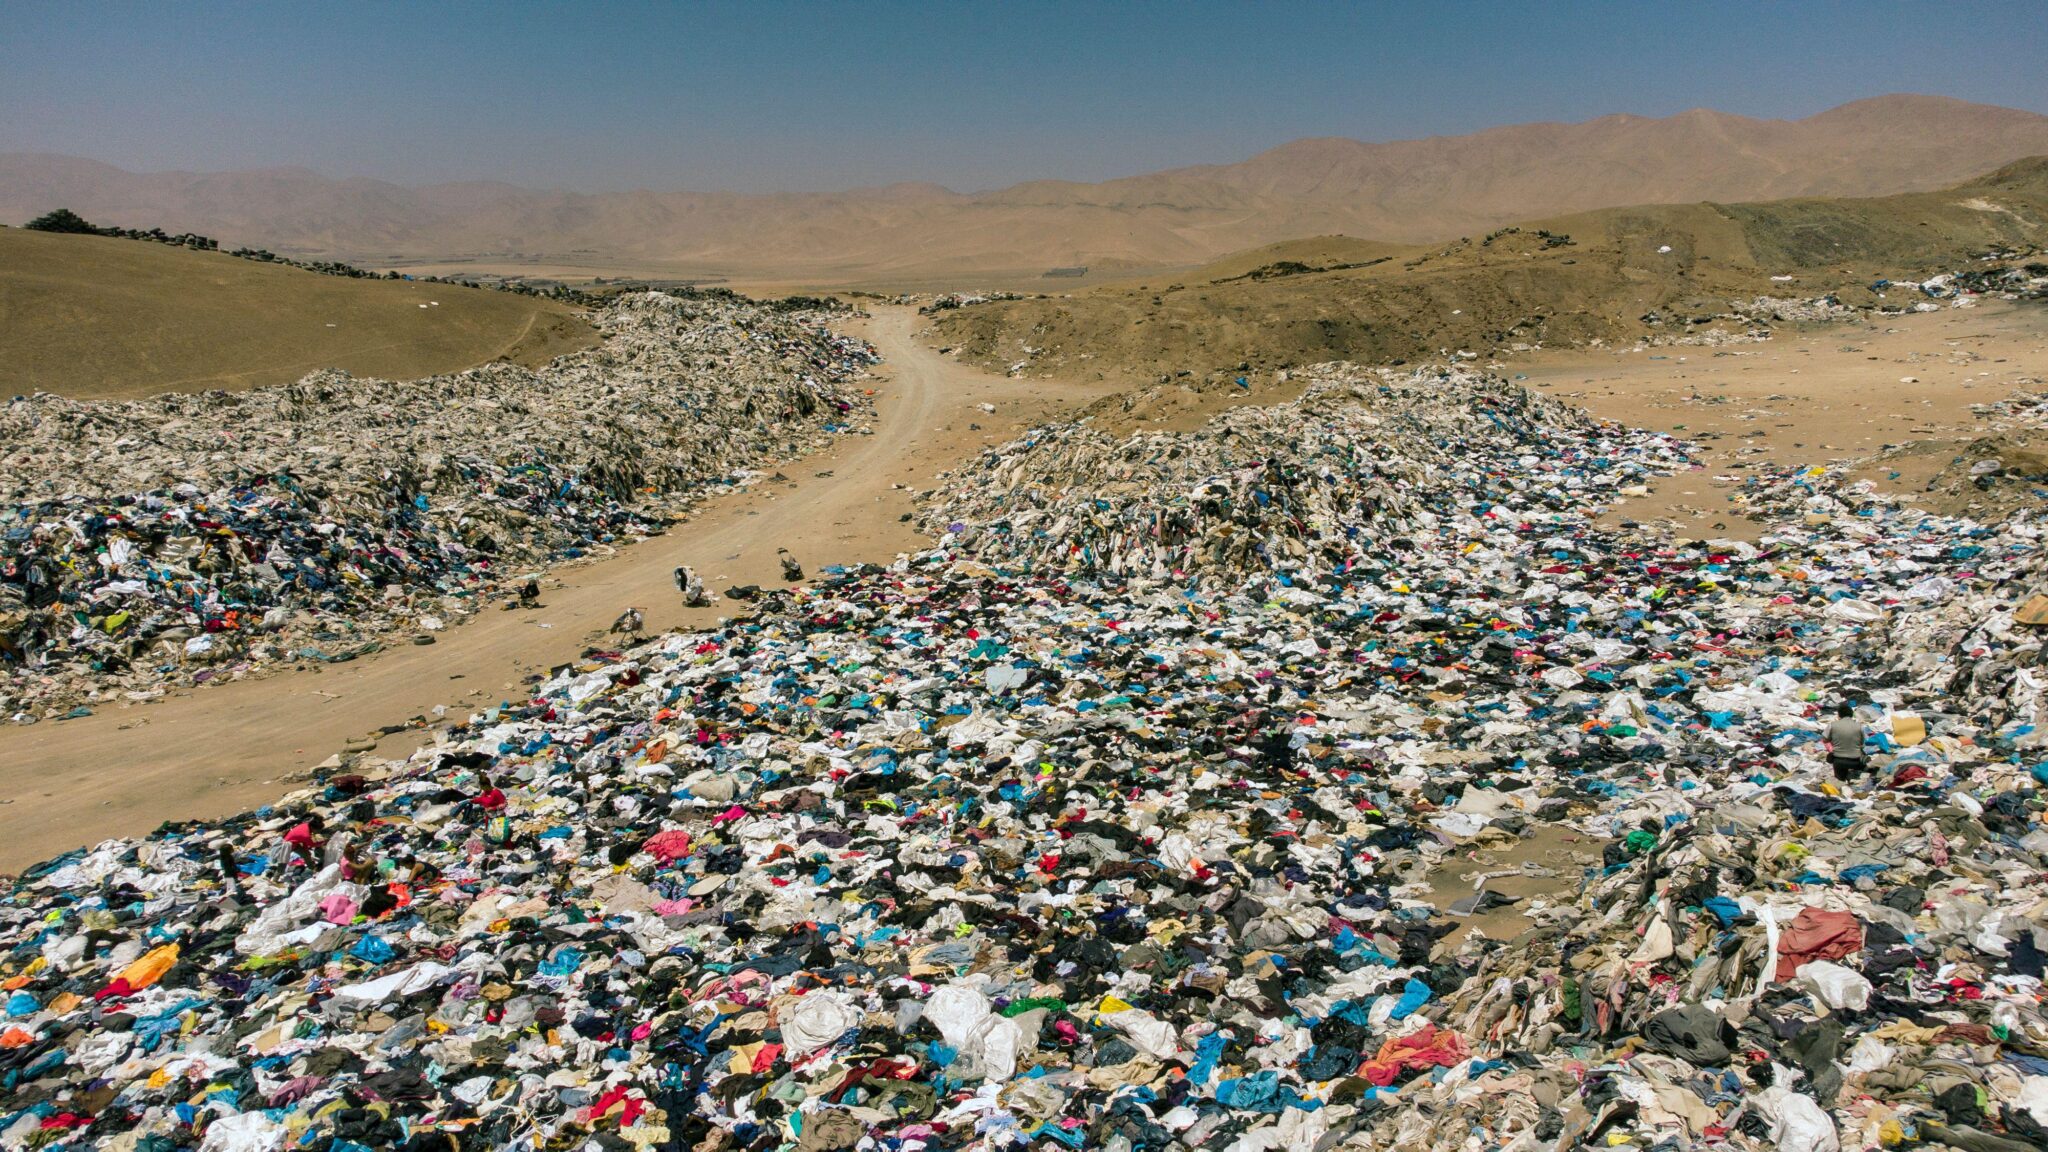 ​View of used clothes discarded in the Atacama desert